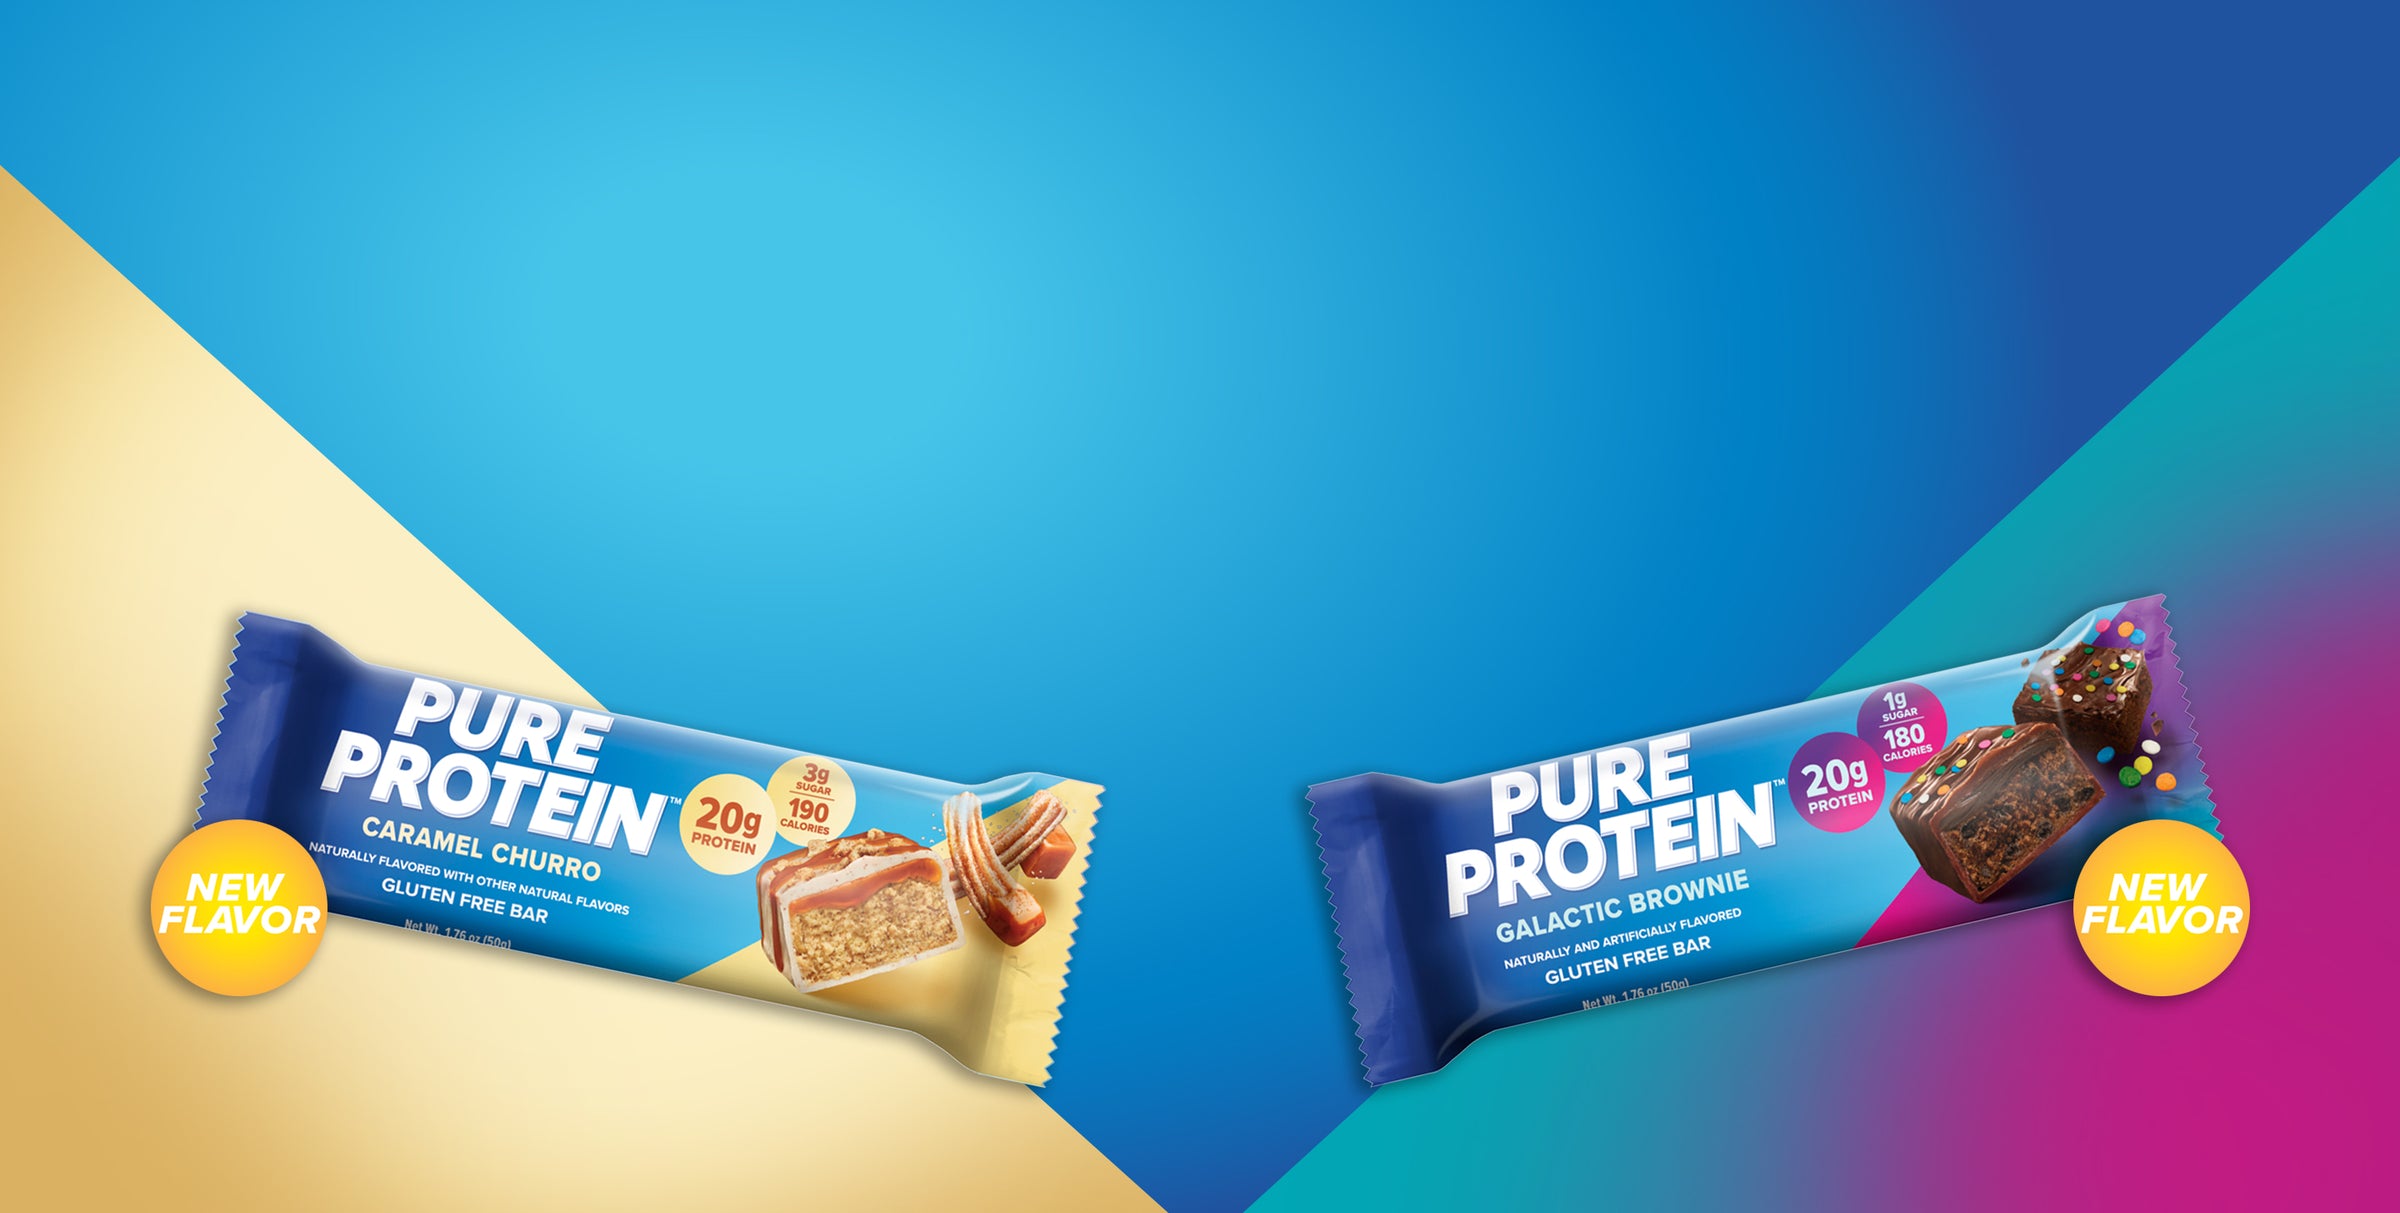 Pure Protein Caramel Churro and Pure Protein Galactic Brownie Bars